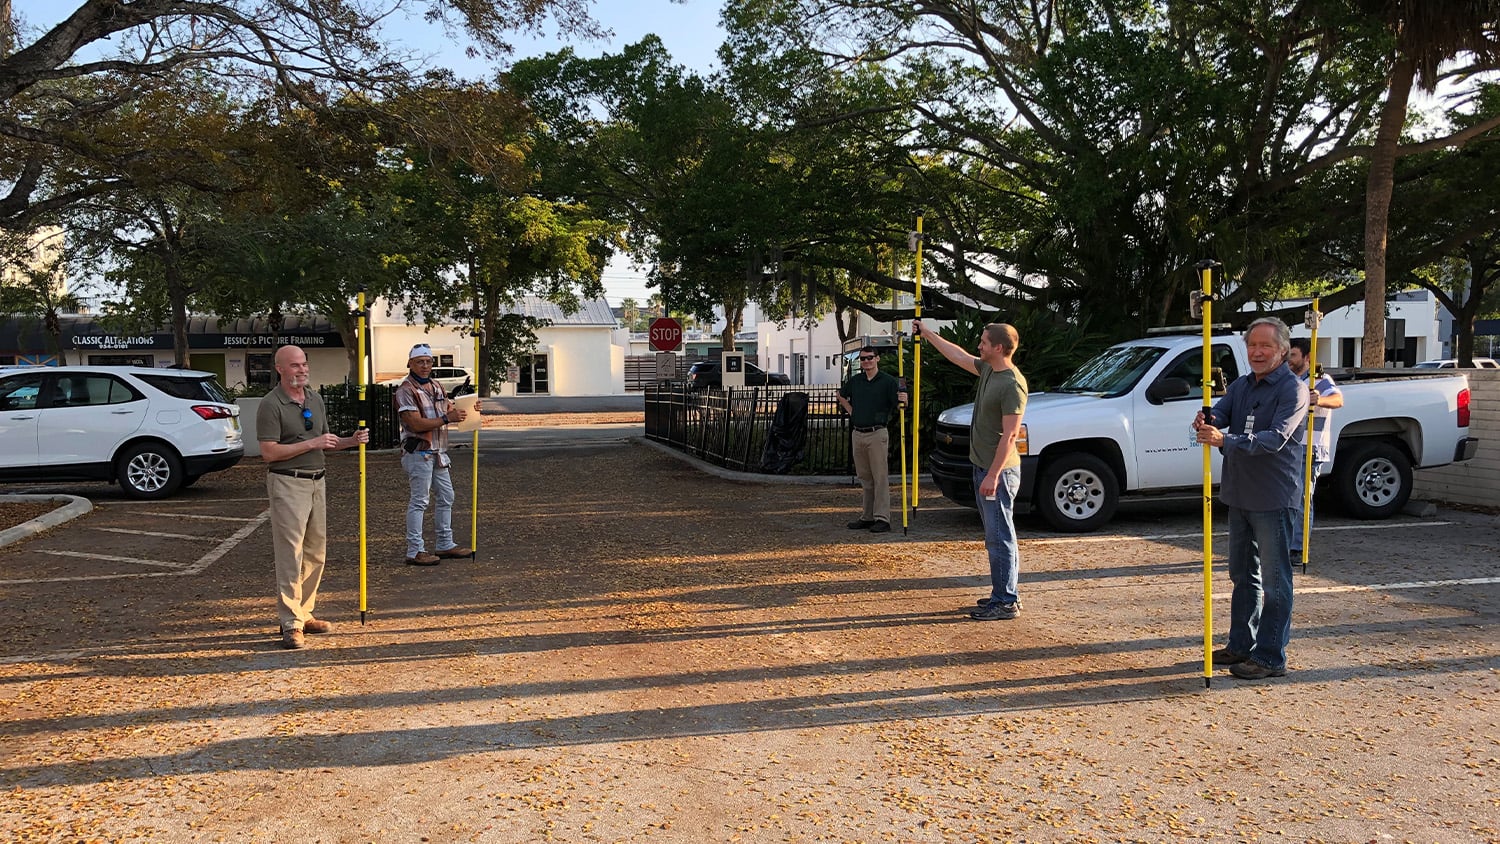 The City of Sarasota Trains Employees on the Eos Arrow GNSS Receivers to Map Streetlights, Road Signs, and Other Transportation Assets